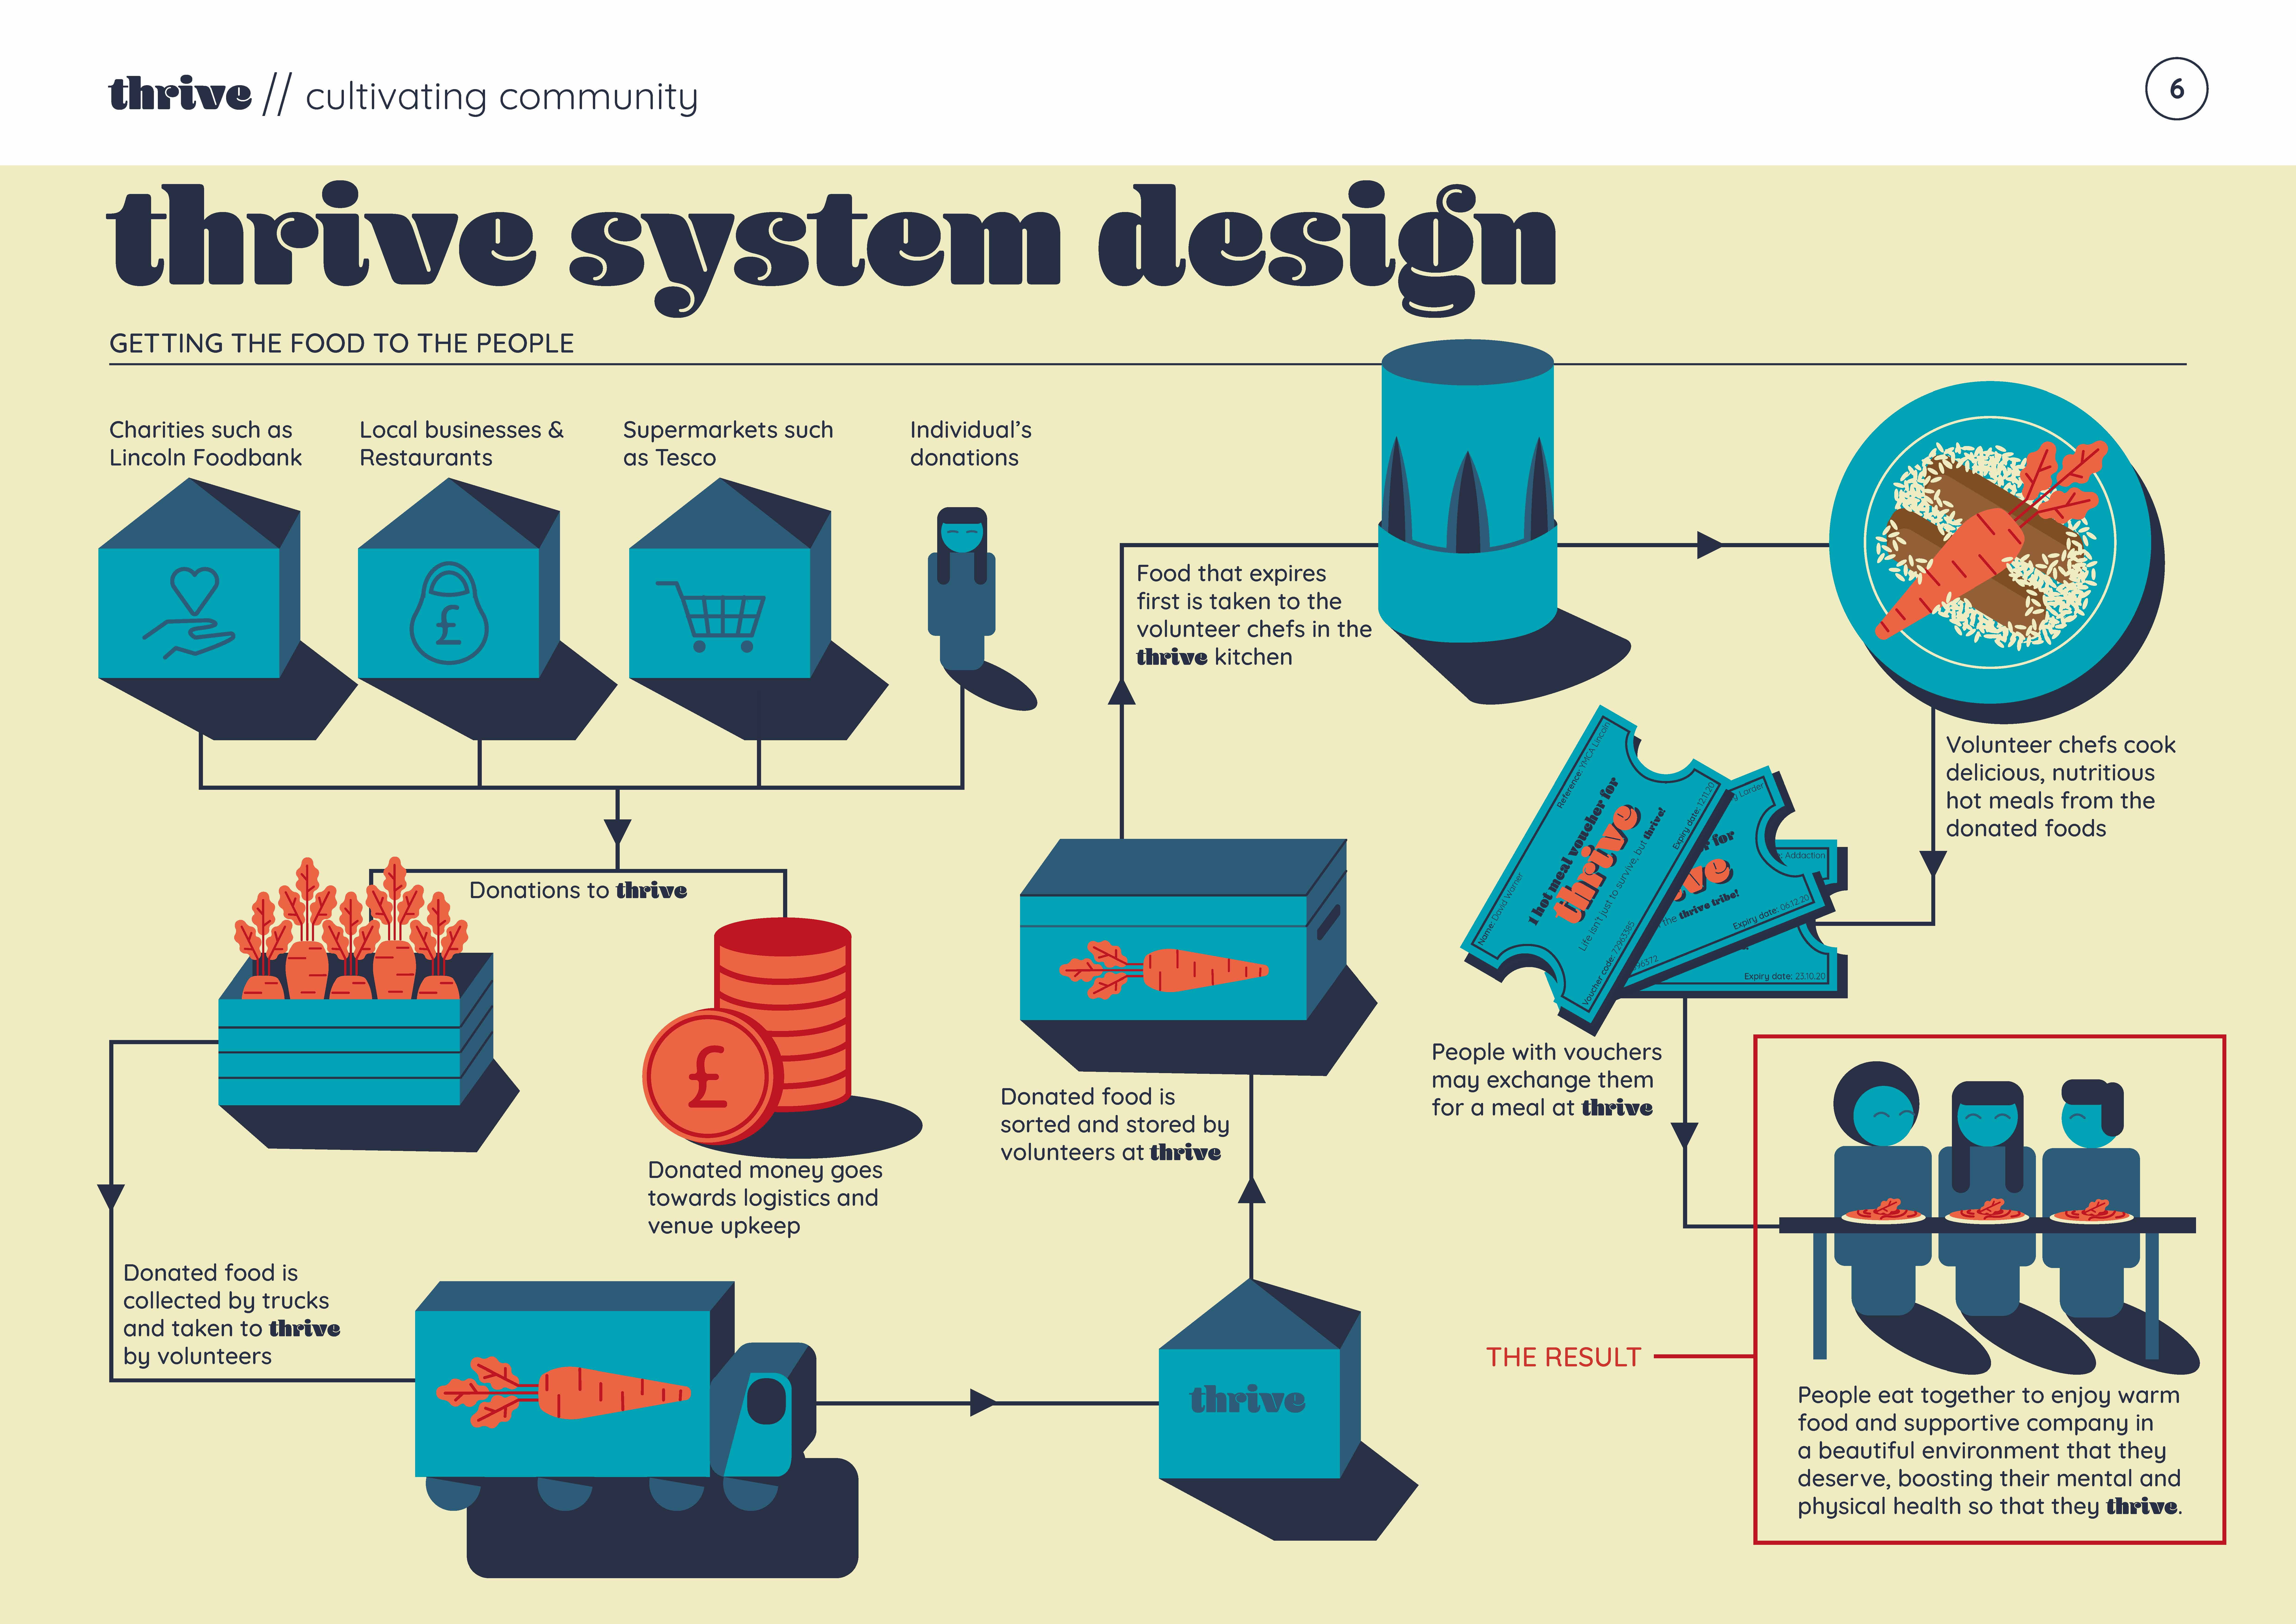 An infographic slide summarising the 'thrive system design'.